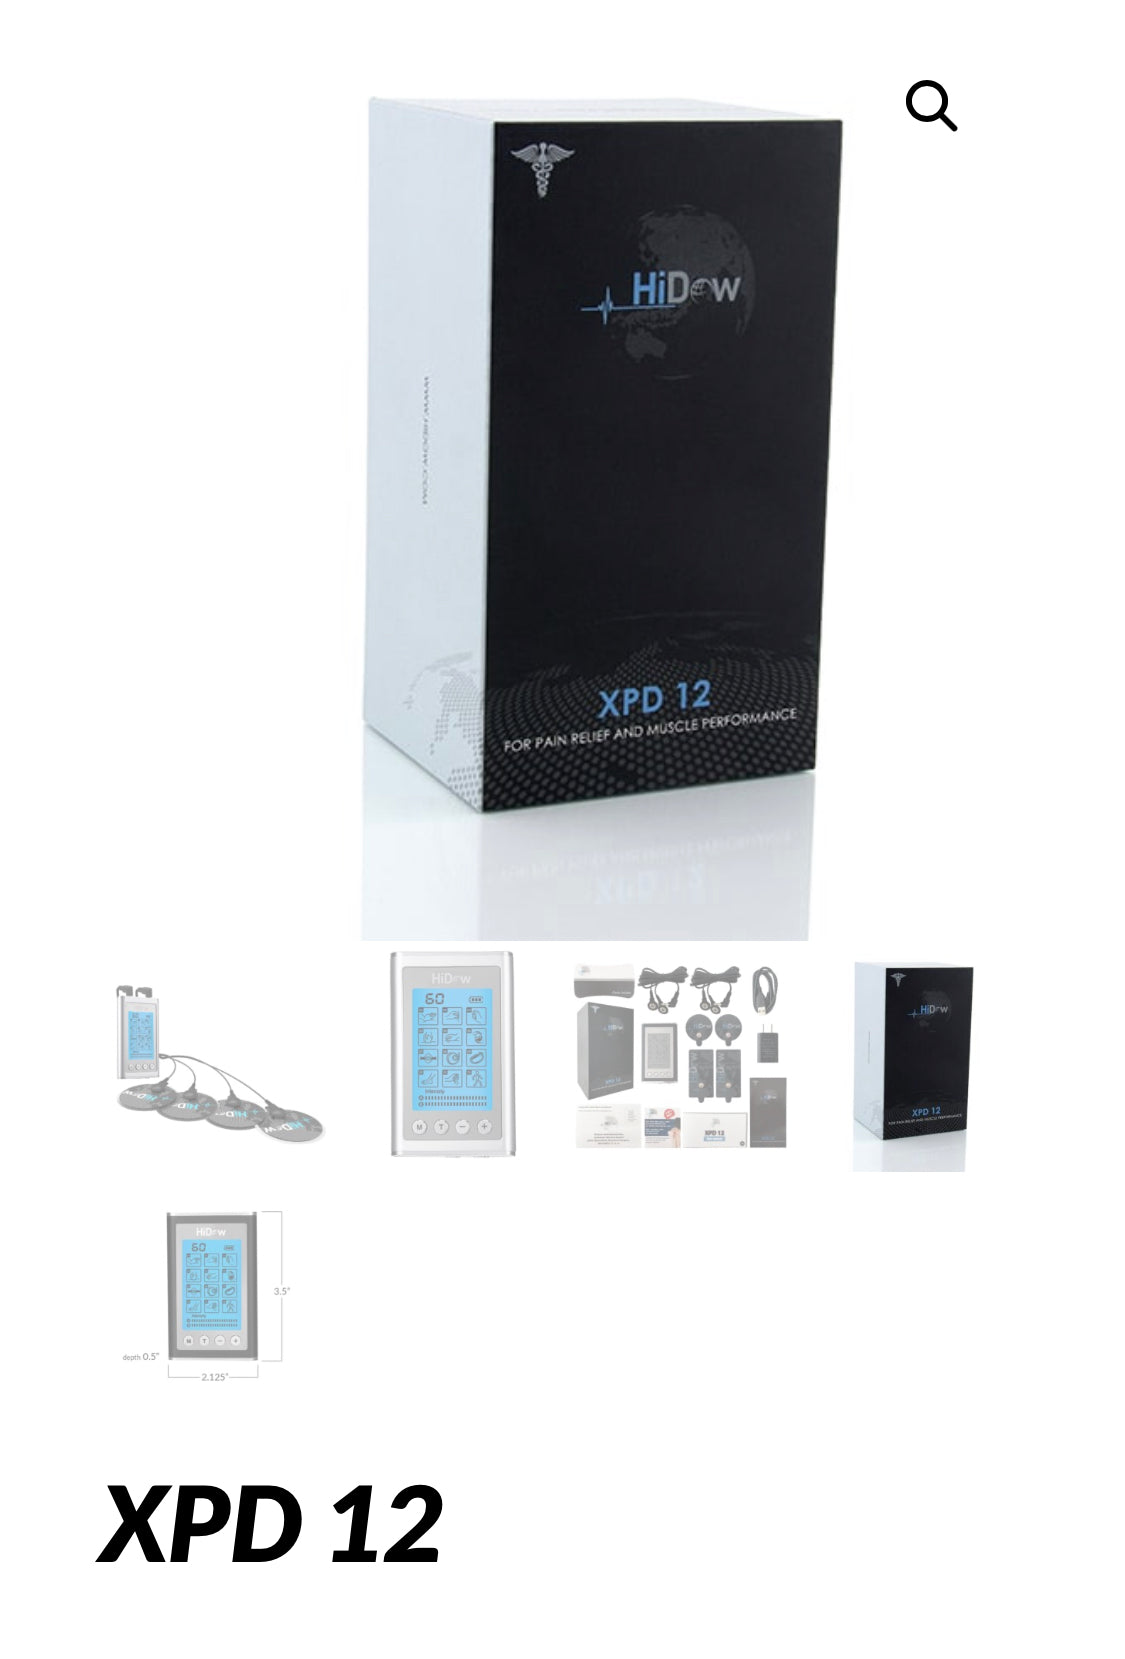 hidow tens unit xpd-12 modes  ems dual independent channels